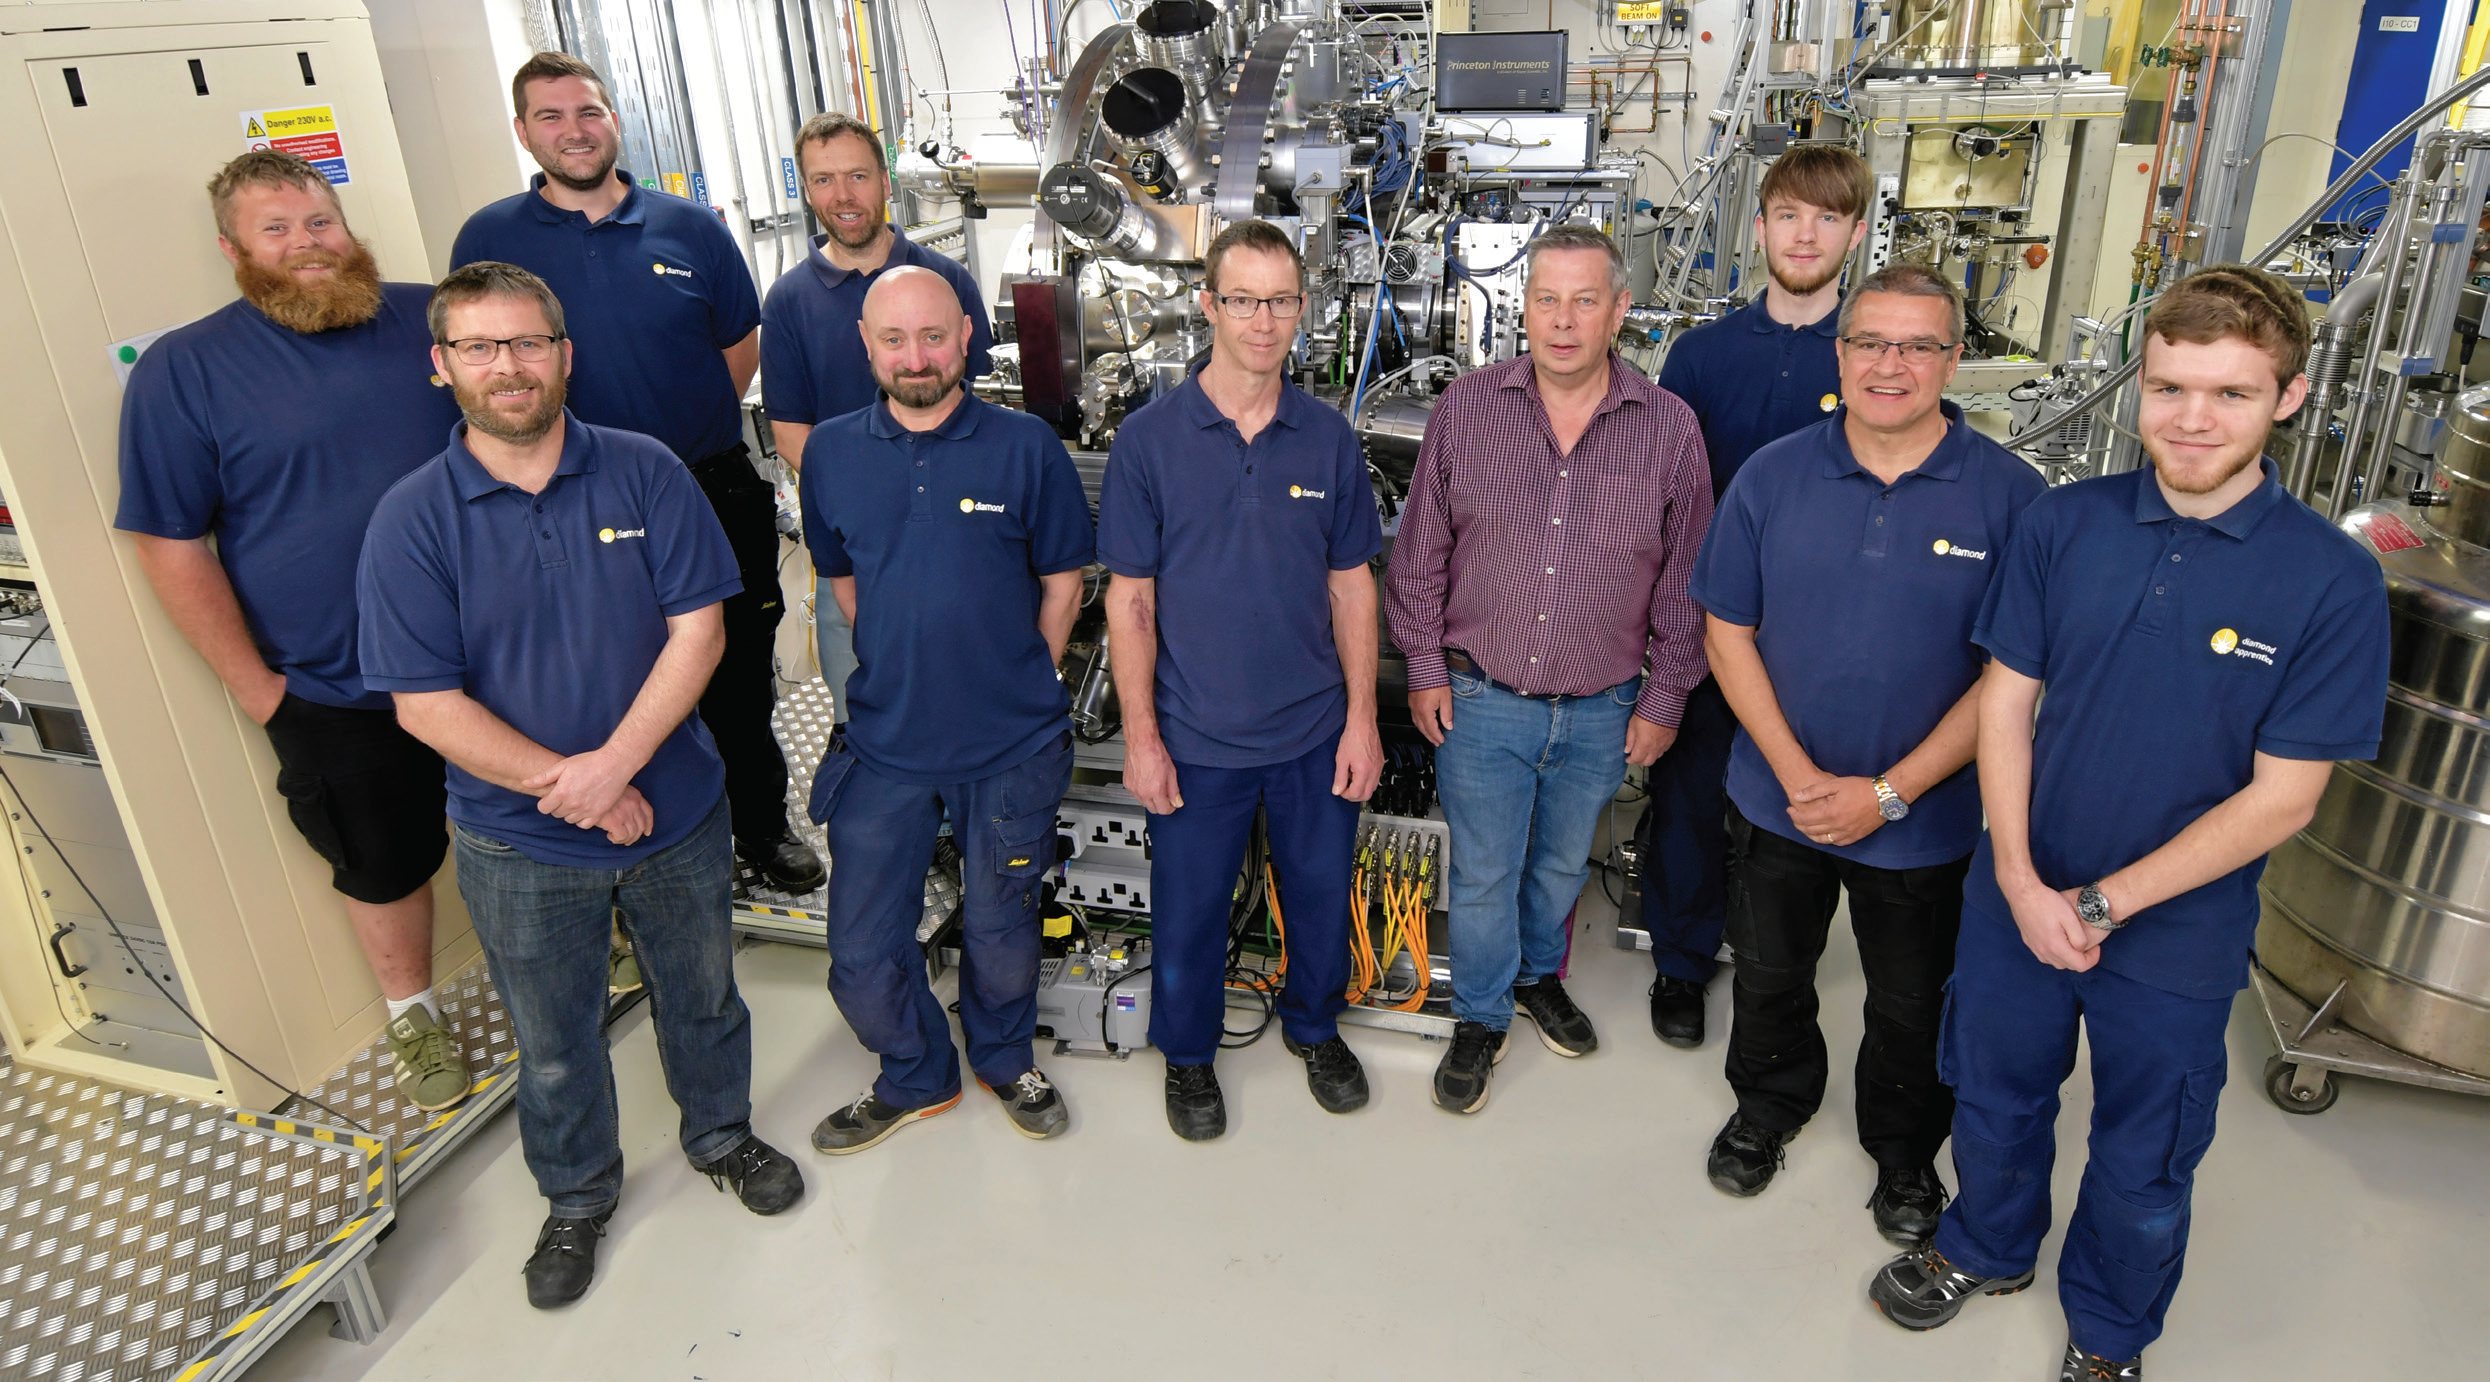 The Magnetic Materials Group Mechanical & Electrical Technicians that underpin the research across the facilities of the group, from left to right, back: Tom Rice, Chris Callaway, Andy Malandain, Ryan<br/>Russell. Front: Matthew Hilliard, Lee White, Mark Sussmuth, Richard Mott, Mike Matthews, Sam Embling.